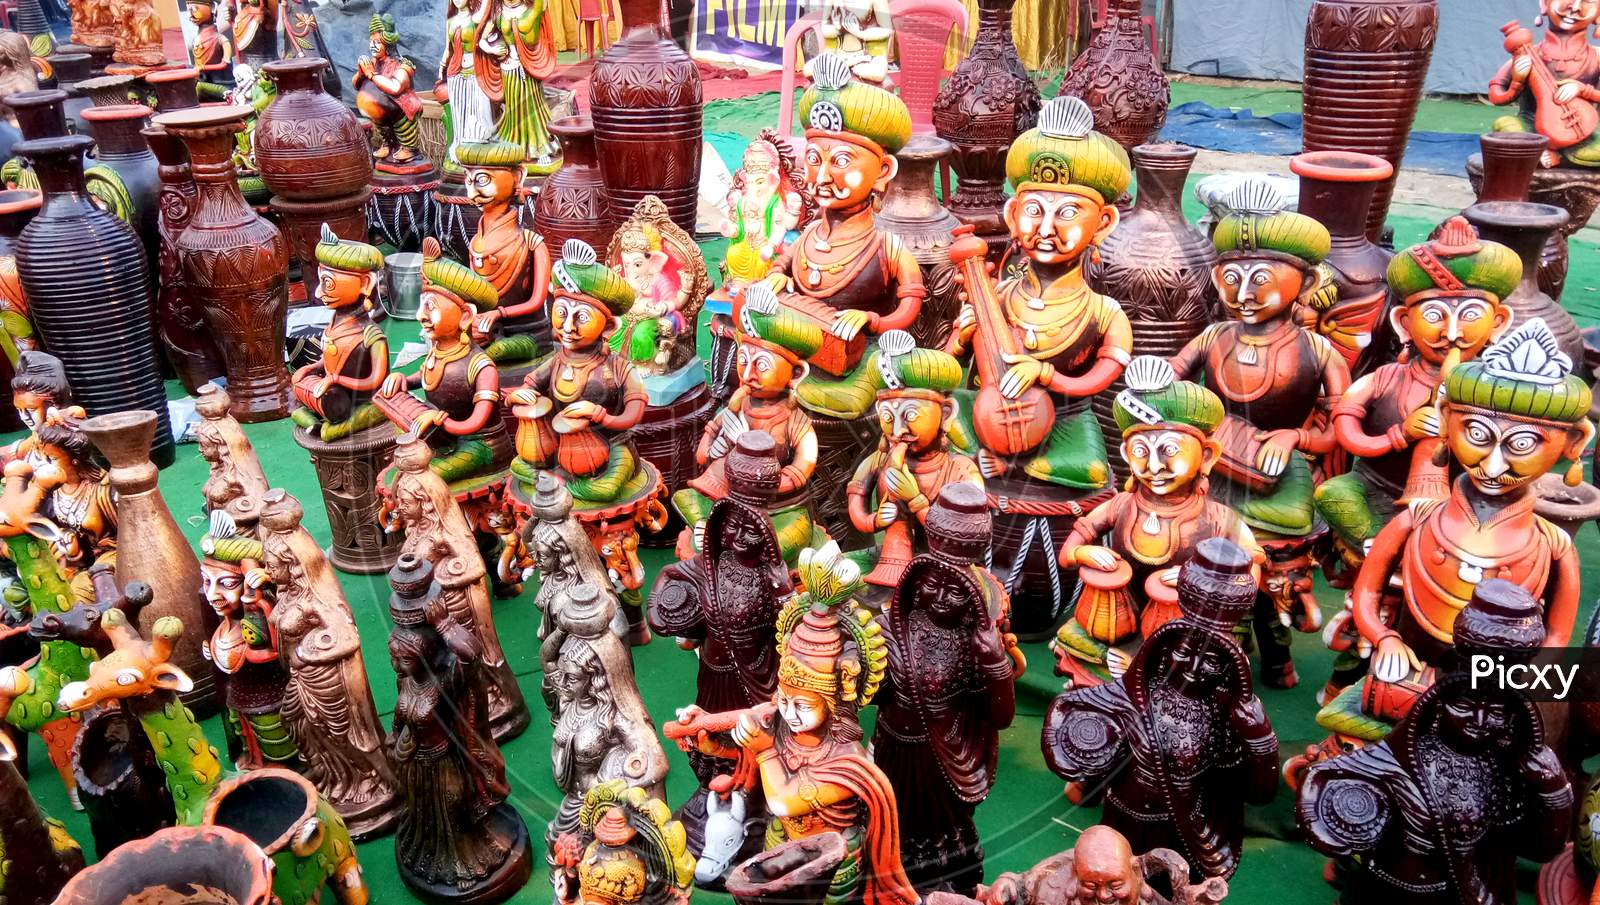 Handmade Puppet Models Of Musicians And Dancers With Traditional Costumes.Displayed In A Street Shop For Sale. Indian Handicraft And Art